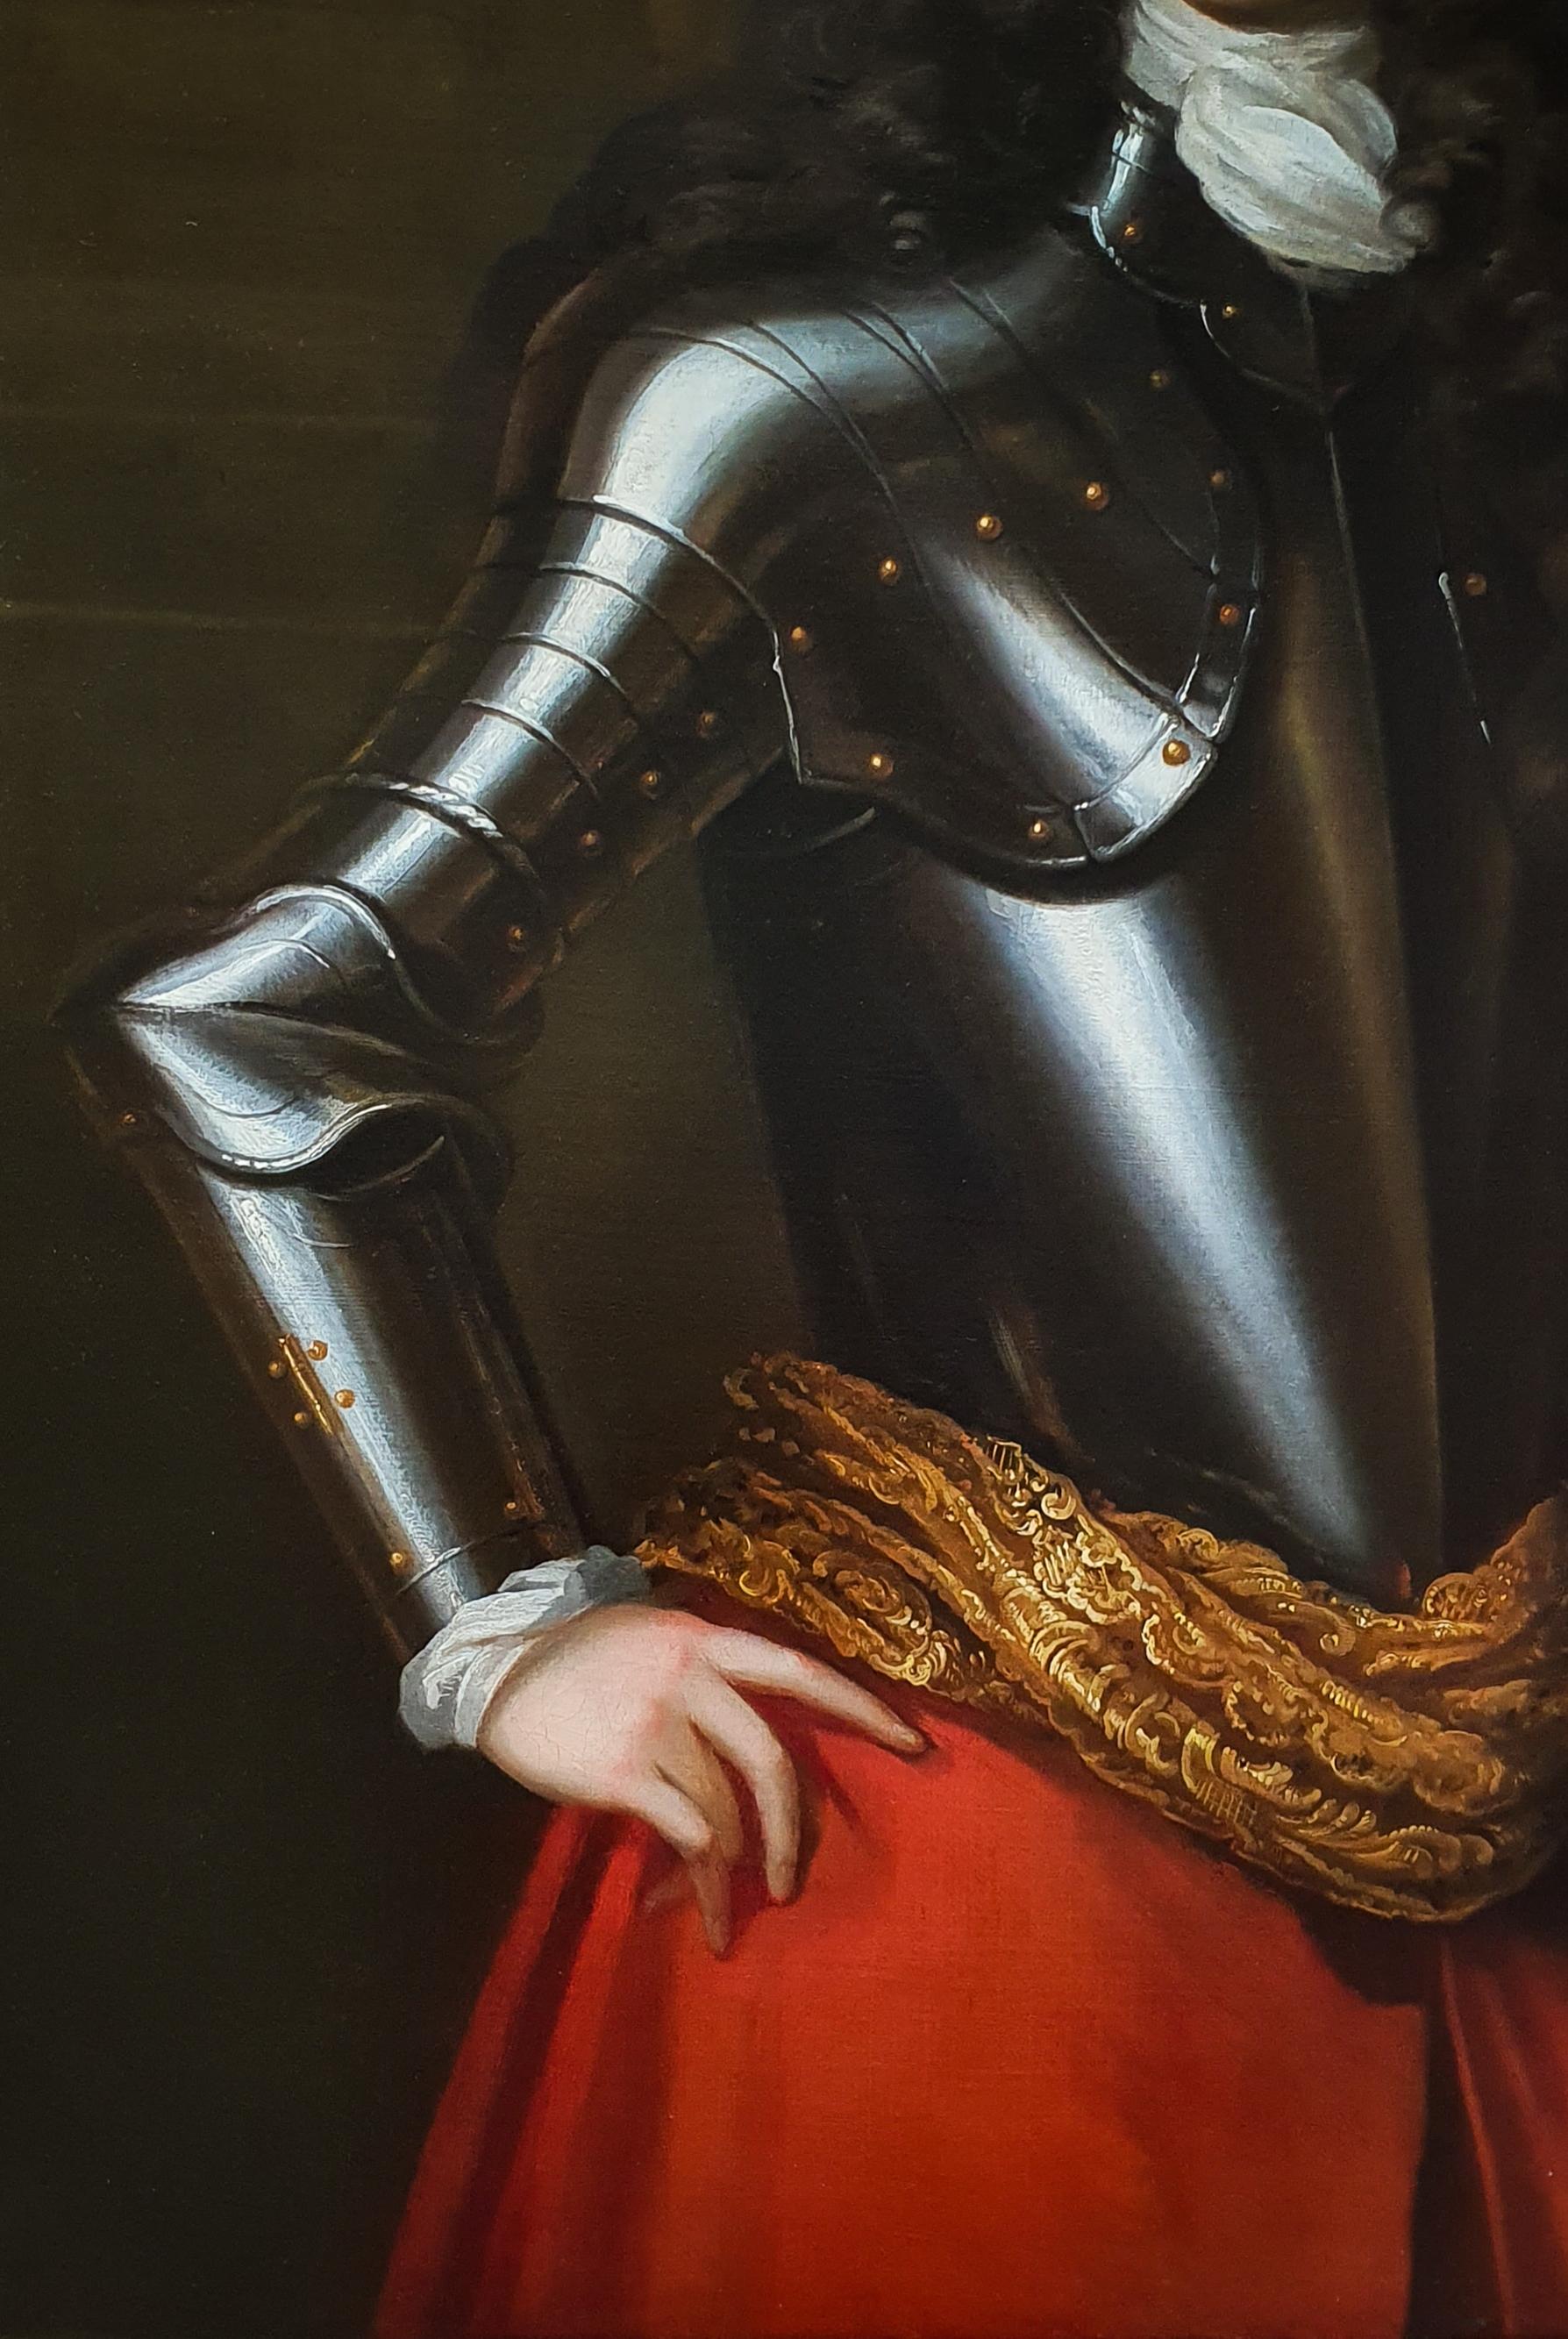 Titan Fine Art are pleased to present this remarkable portrait that once formed part of the family collection of the Viscounts Bolingbroke at their family seat Lydiard Tregoze, originally built in 1420.  The portrait descended in the family to